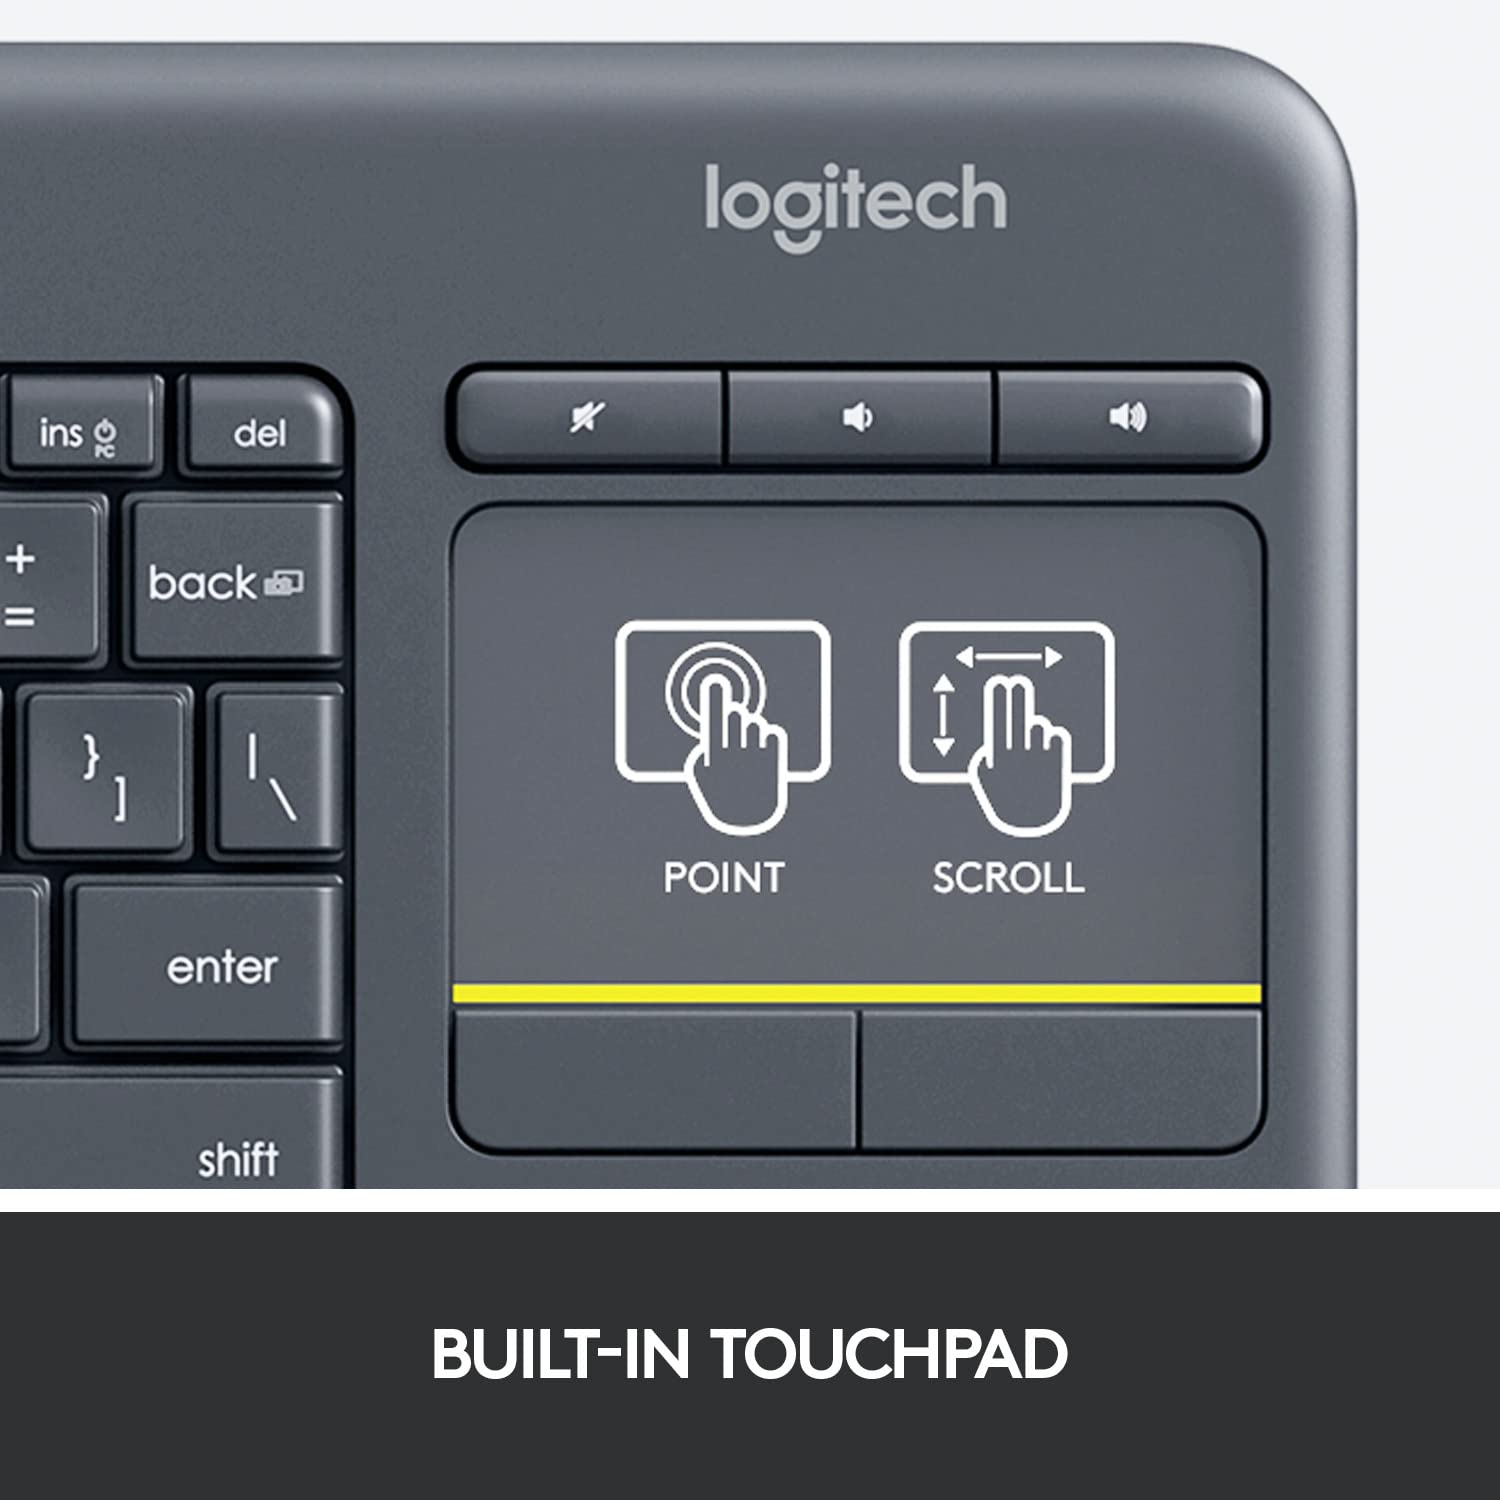 Logitech K400 Plus Wireless Touch With Easy Media Control and Built-in Touchpad, HTPC Keyboard for PC-connected TV, Windows, Android, Chrome OS, Laptop, Tablet - Black